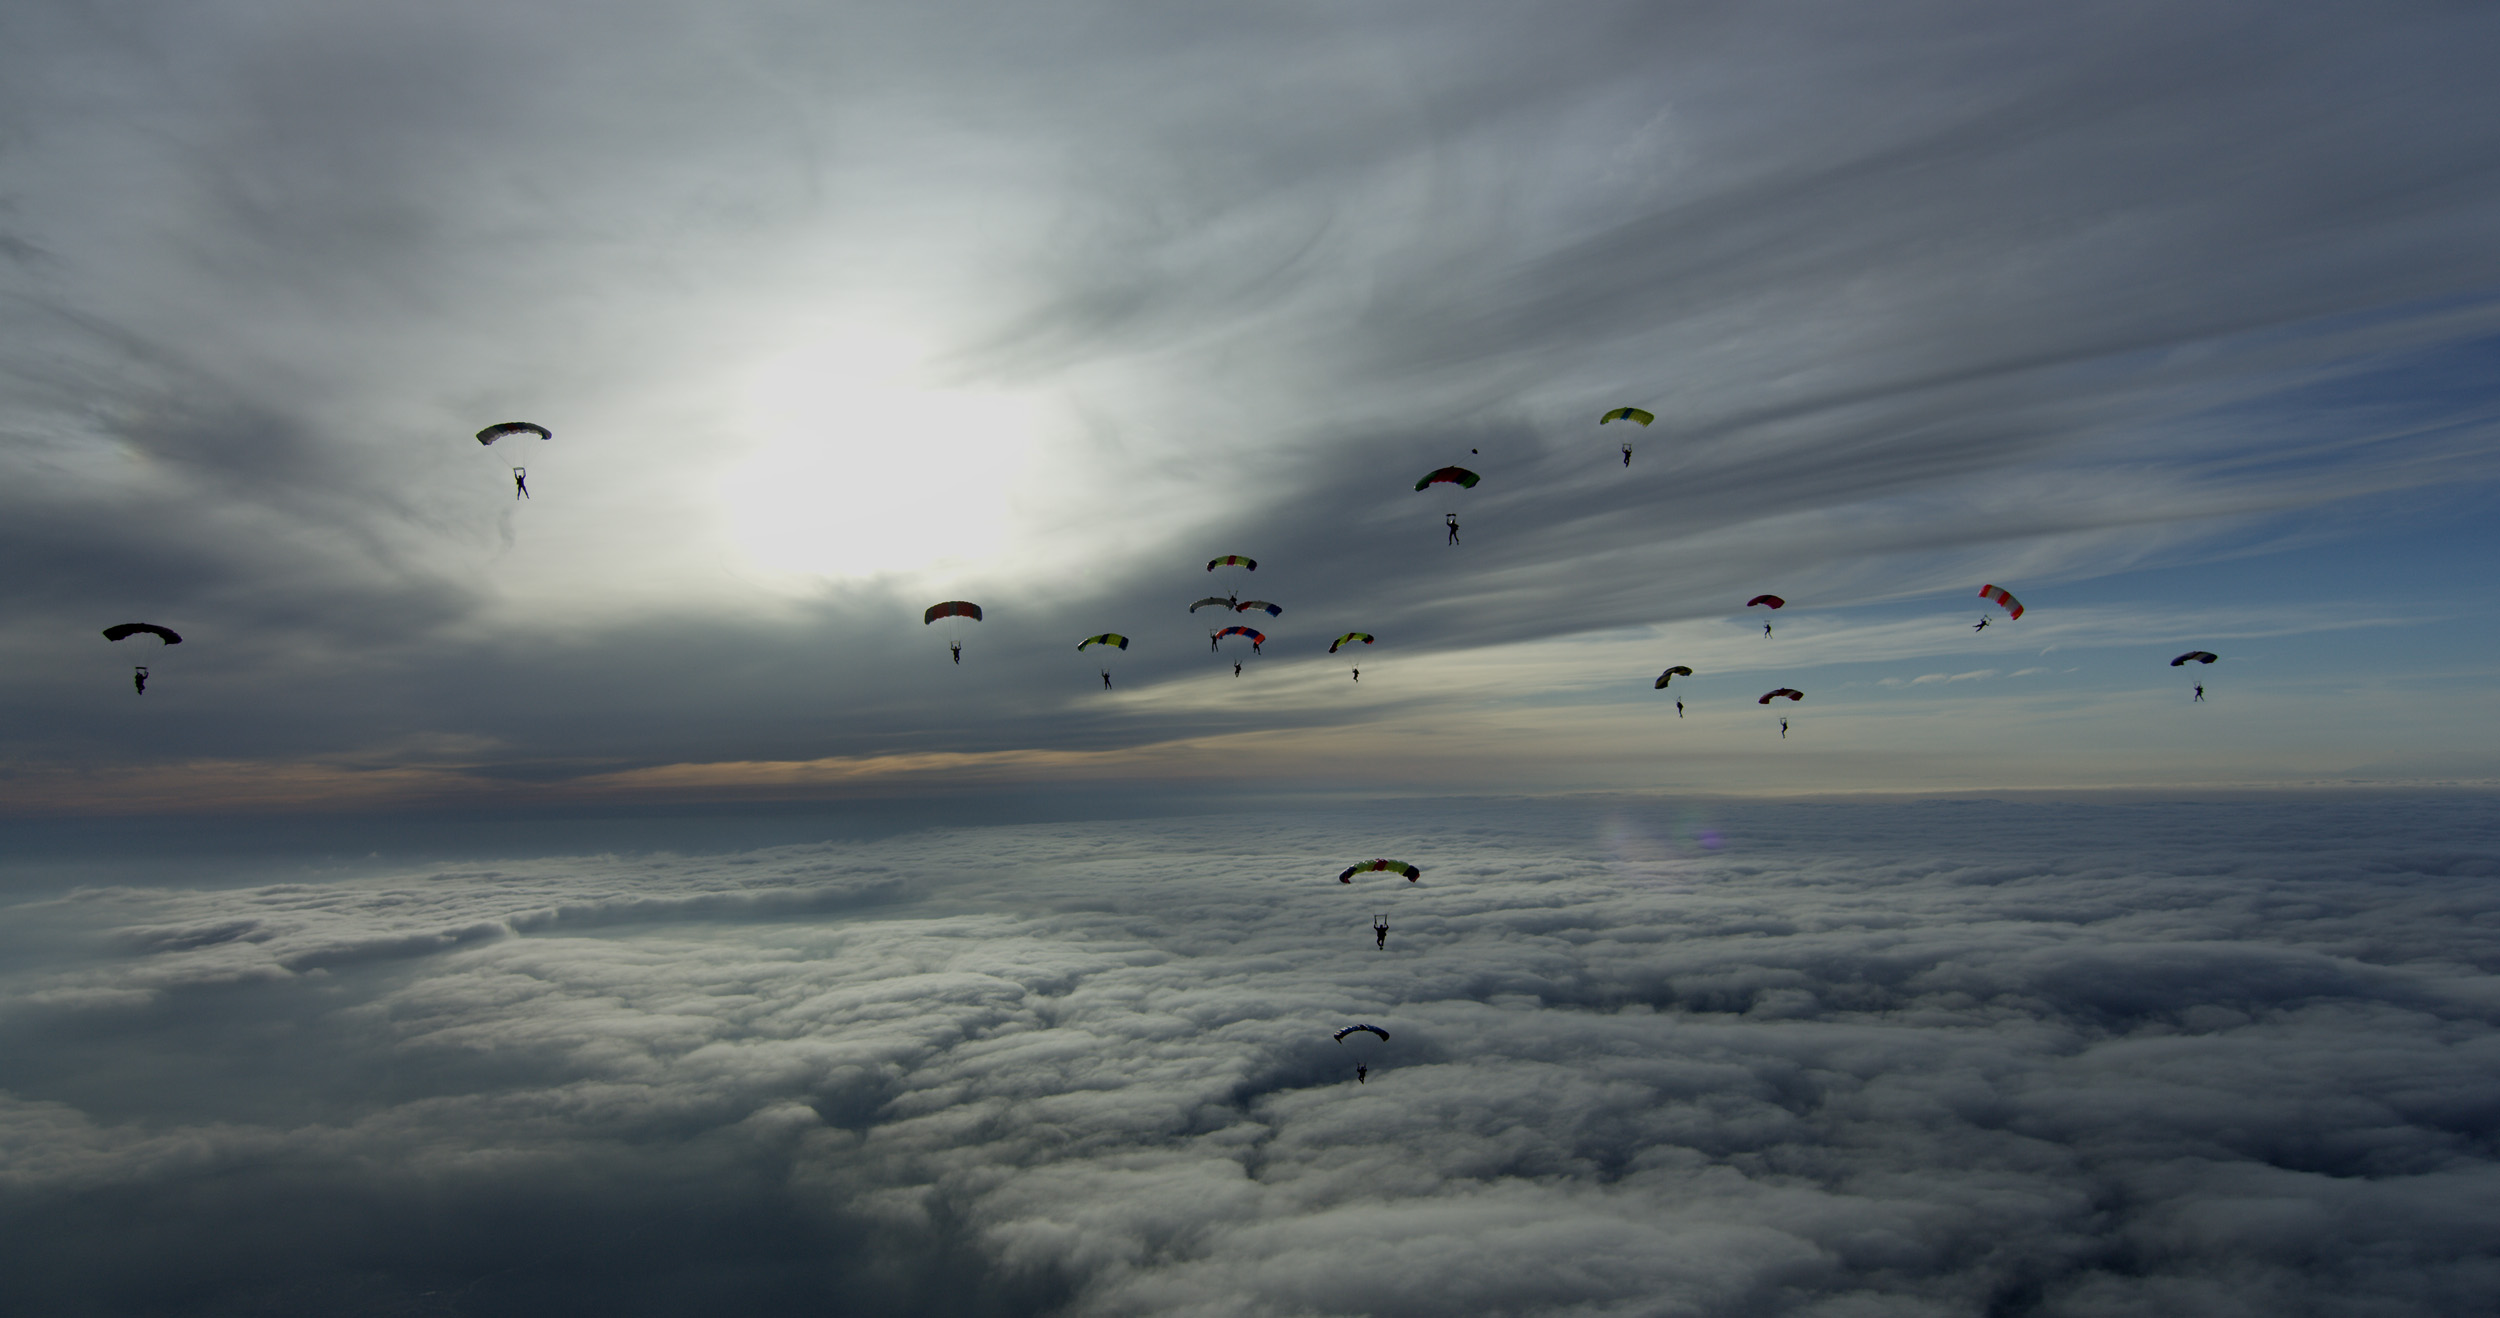 Experienced skydivers, ready for film action